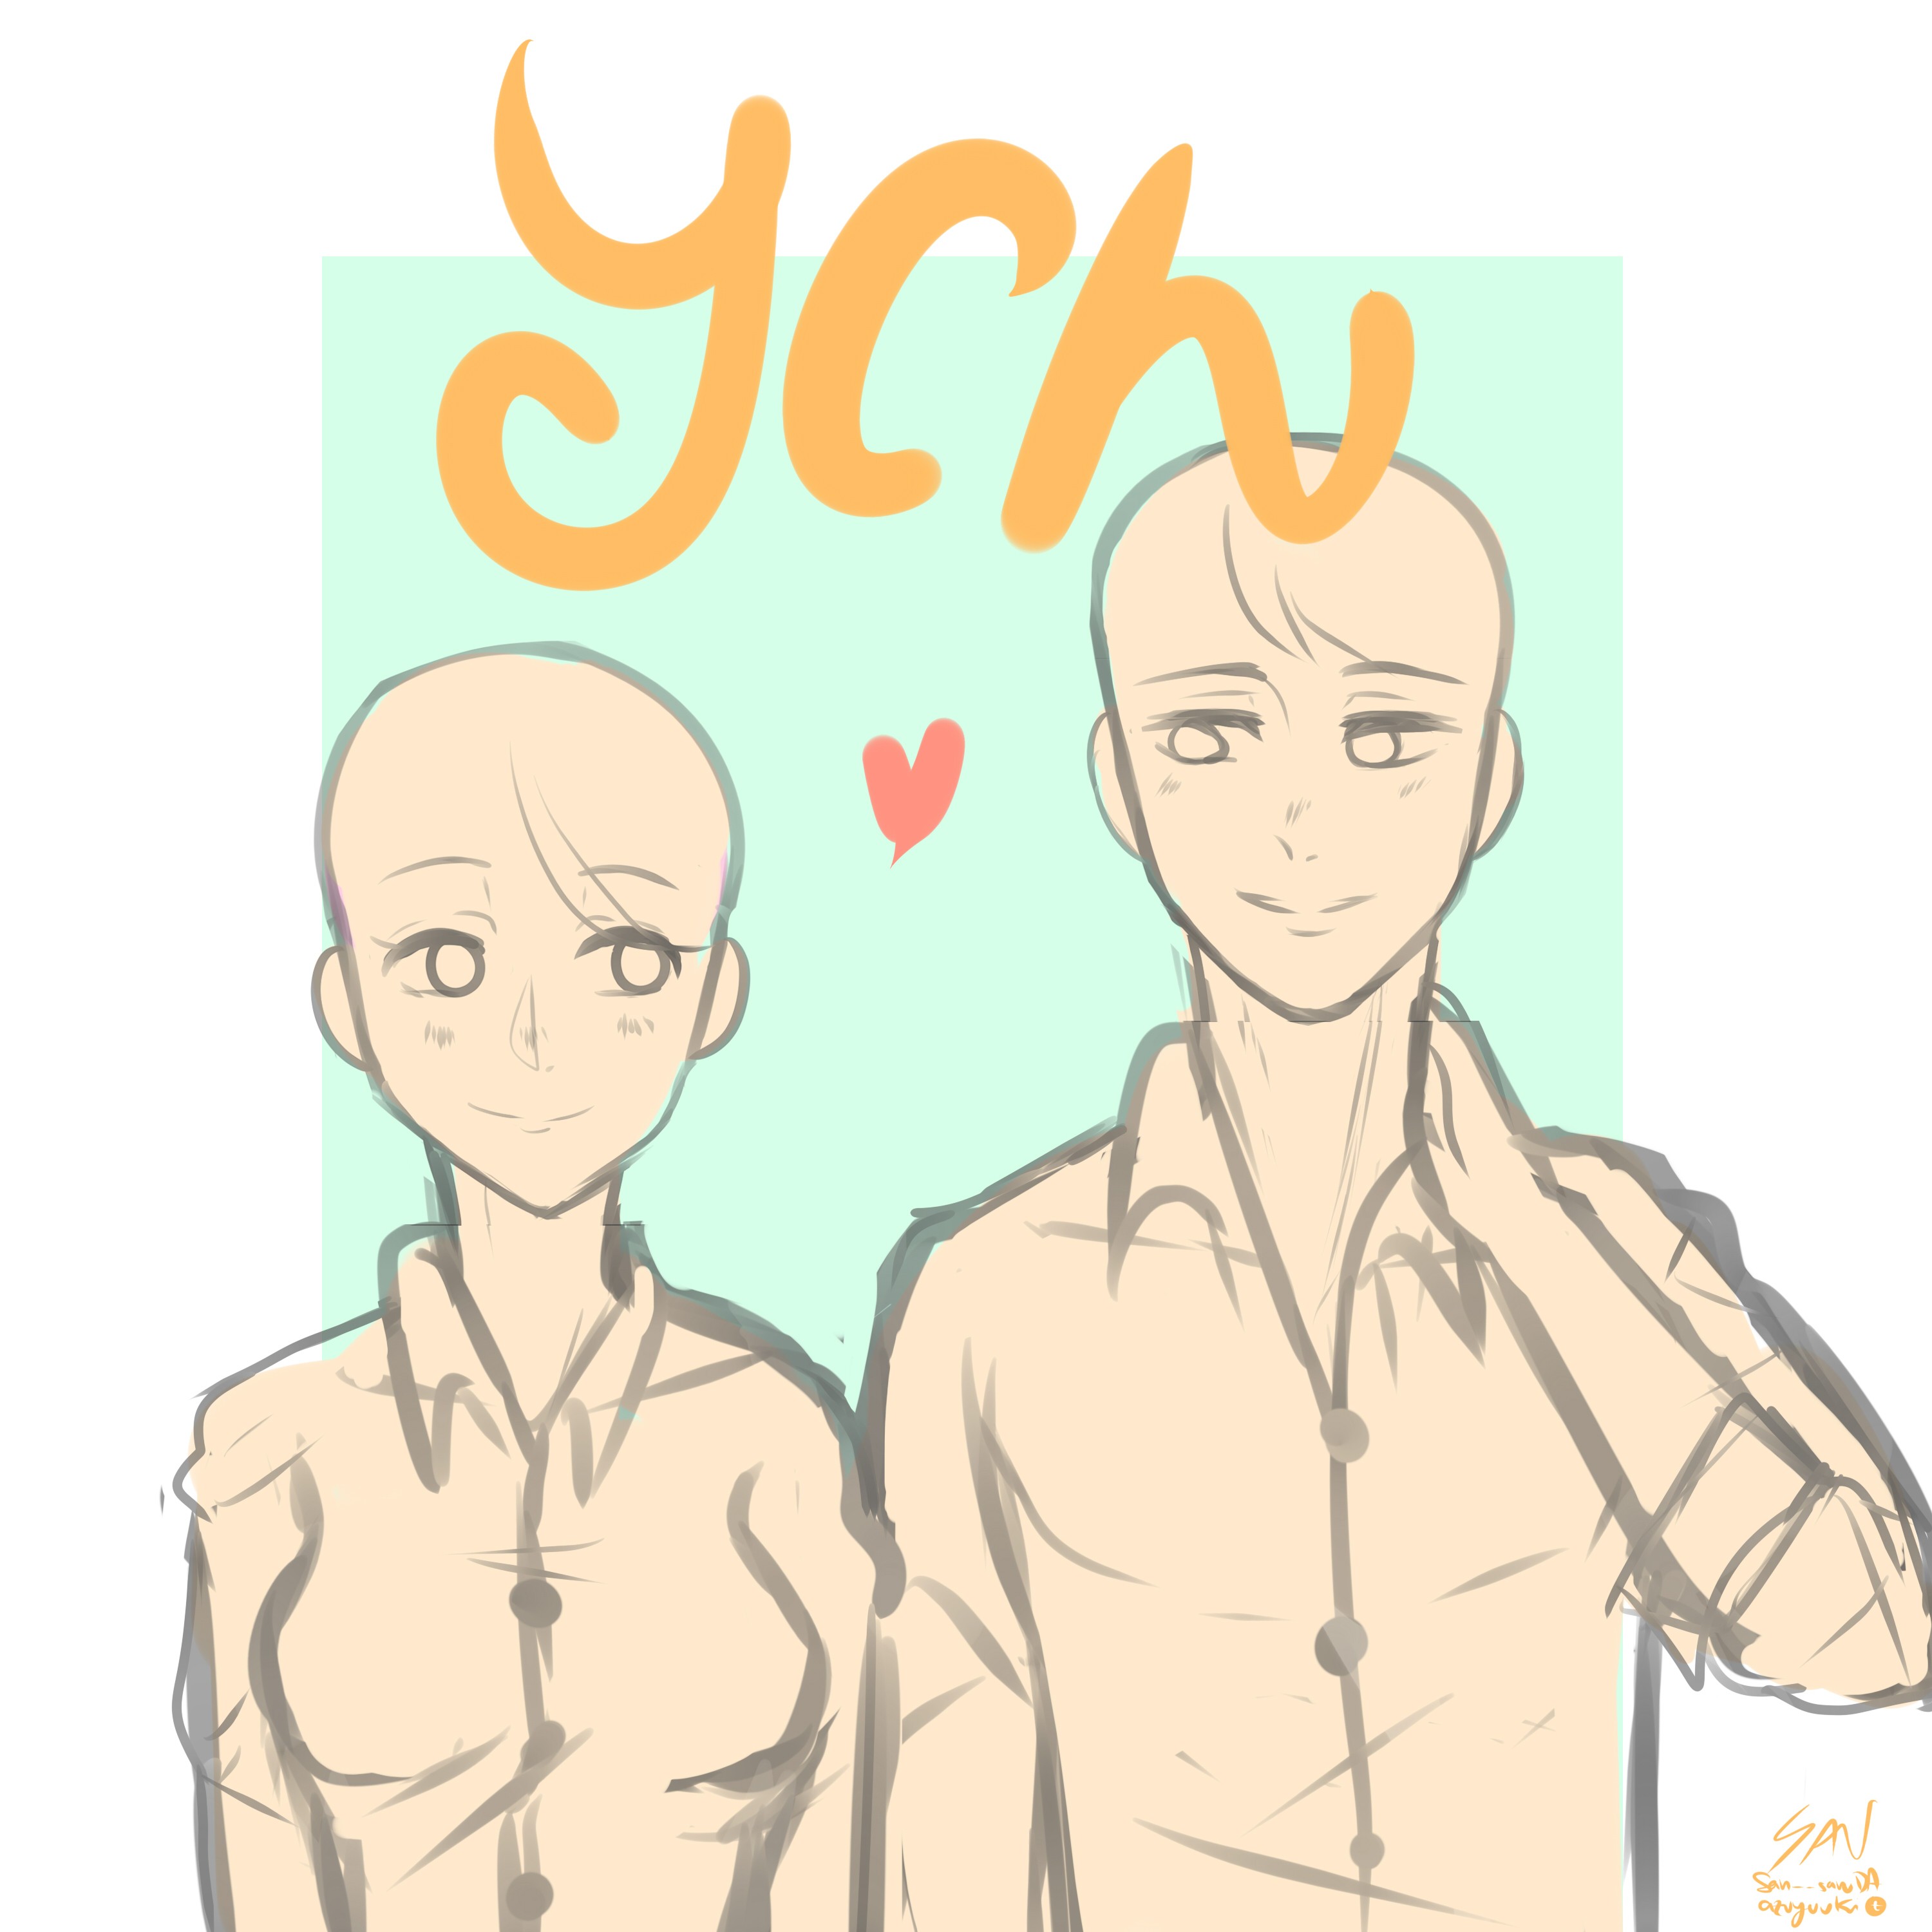 Ych Base Girl Anime Base 1000 Base Names Magic Ych Commishes Human being (human +being) is a. ych